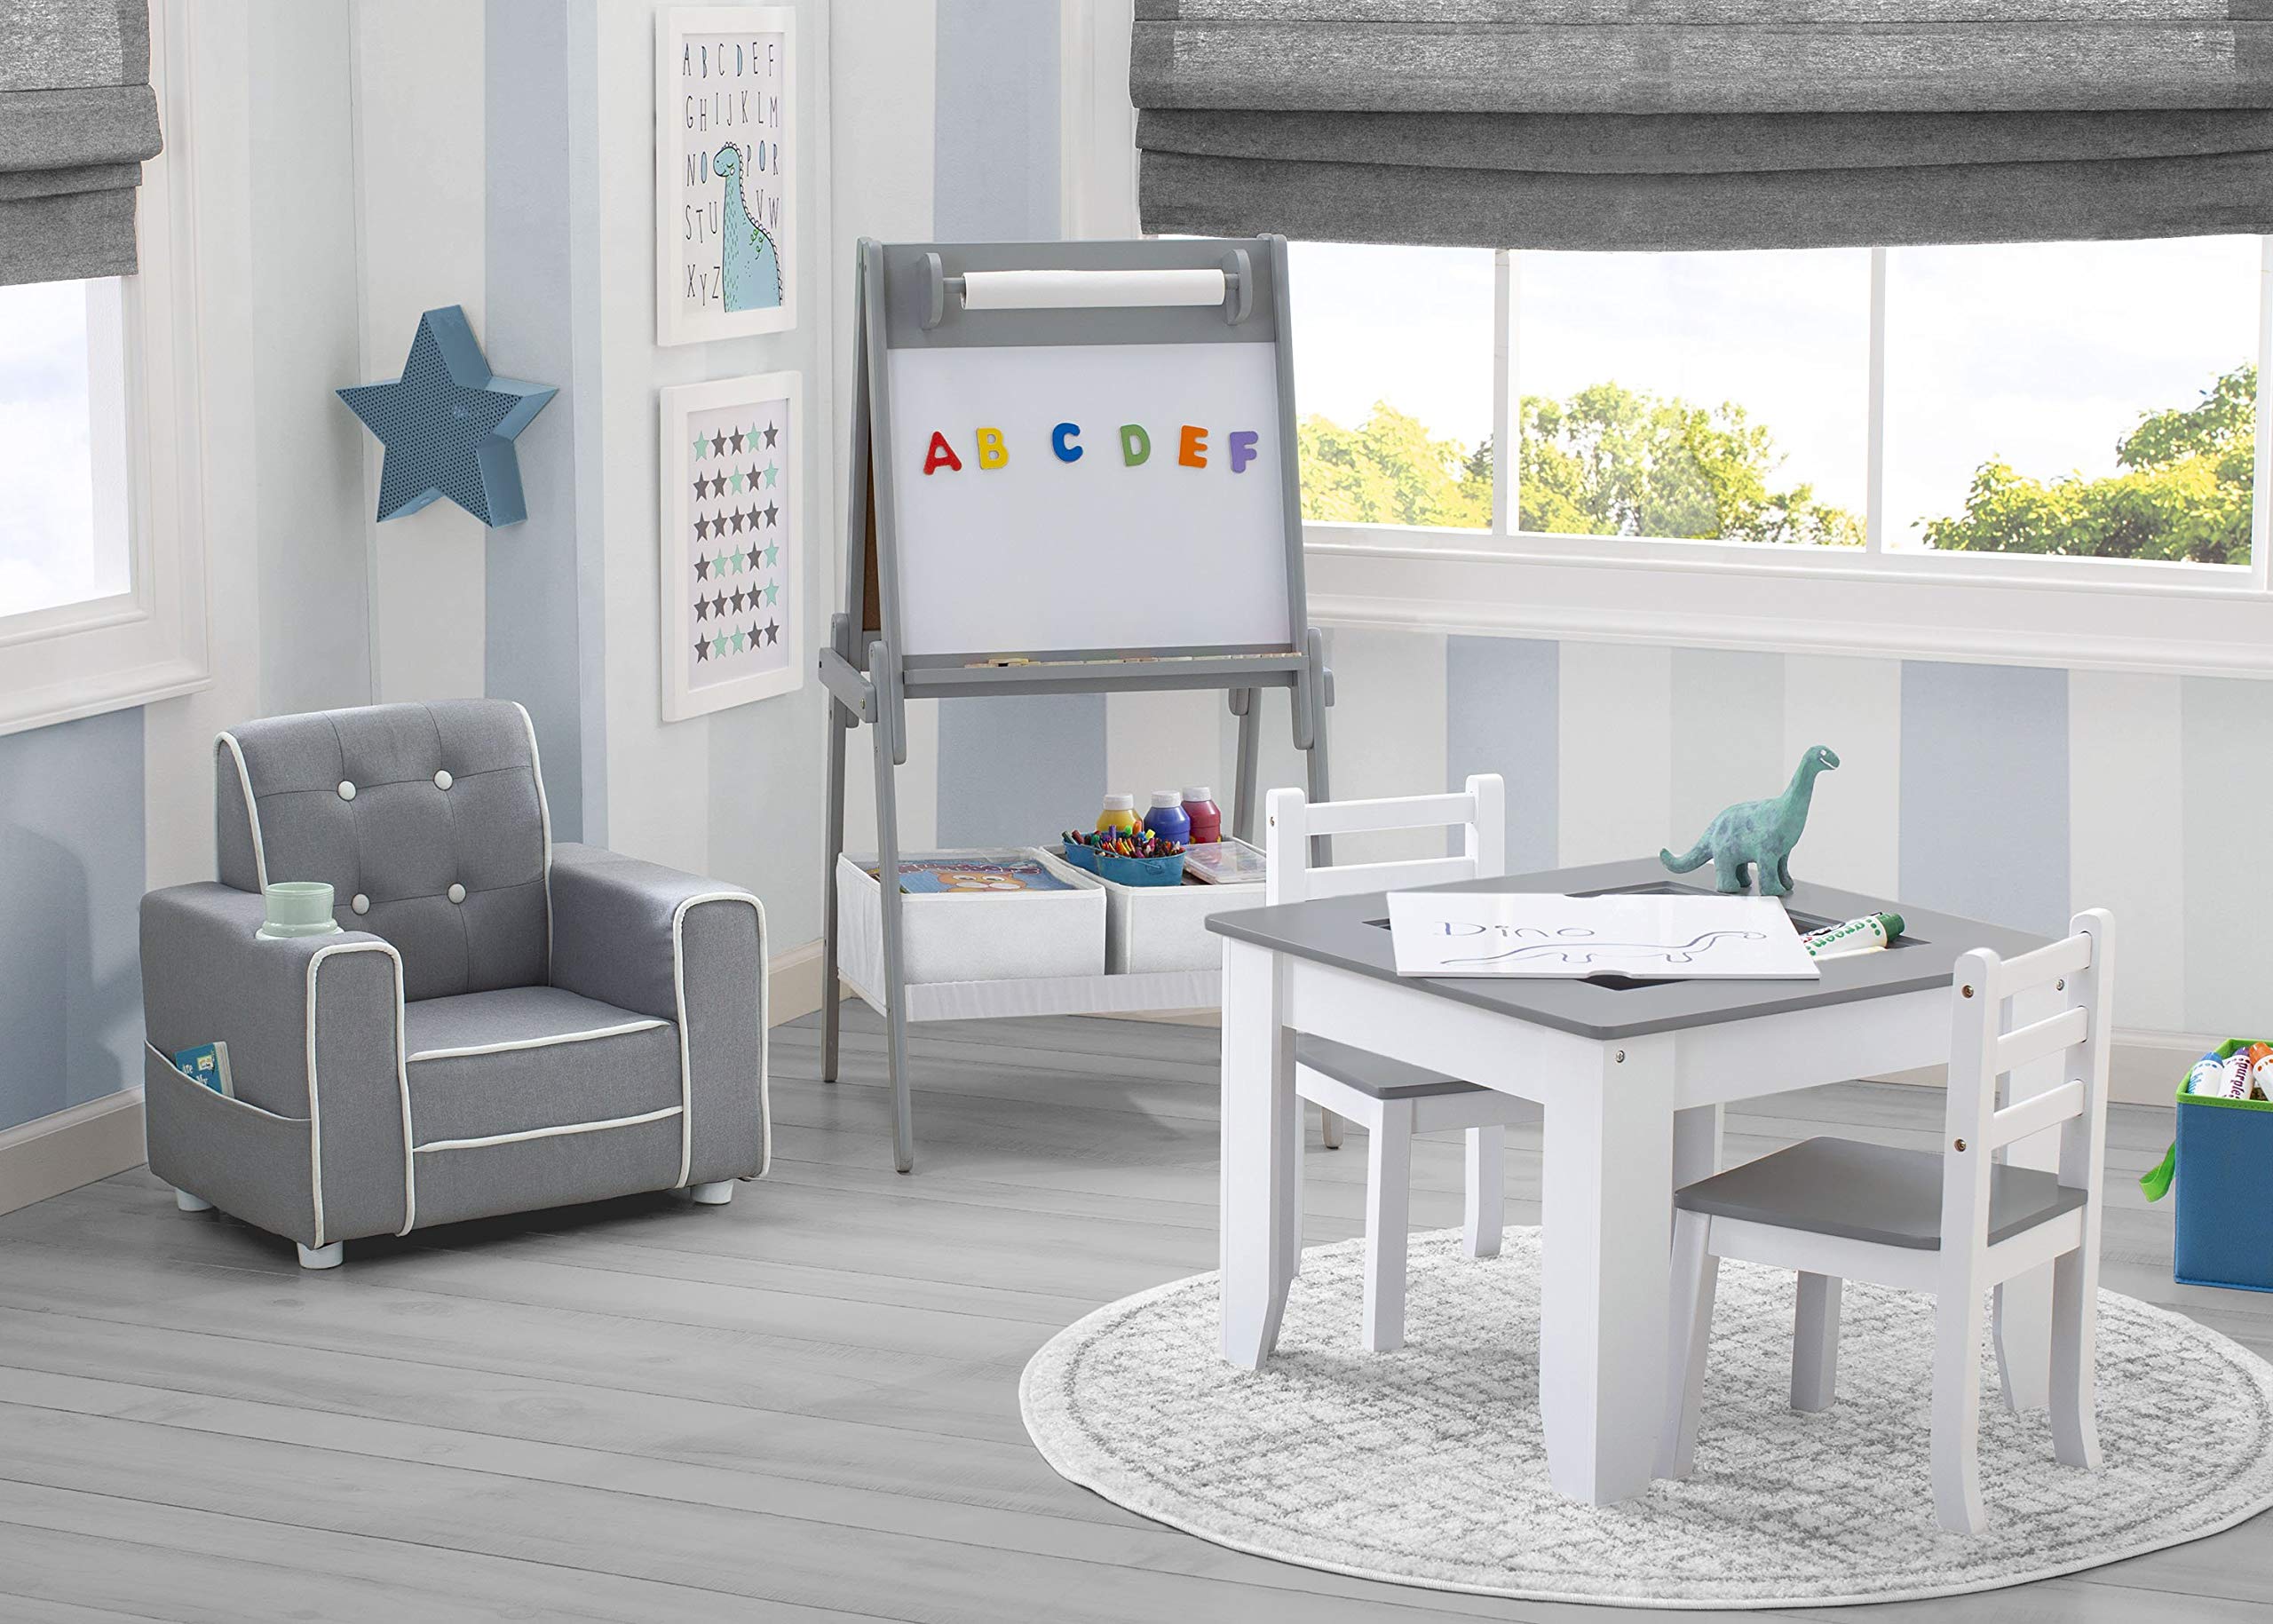 Delta children chelsea 5-Piece Kids Furniture Set Set Includes: Table & 2 chairs Easel Upholstered chair (greyWhite)